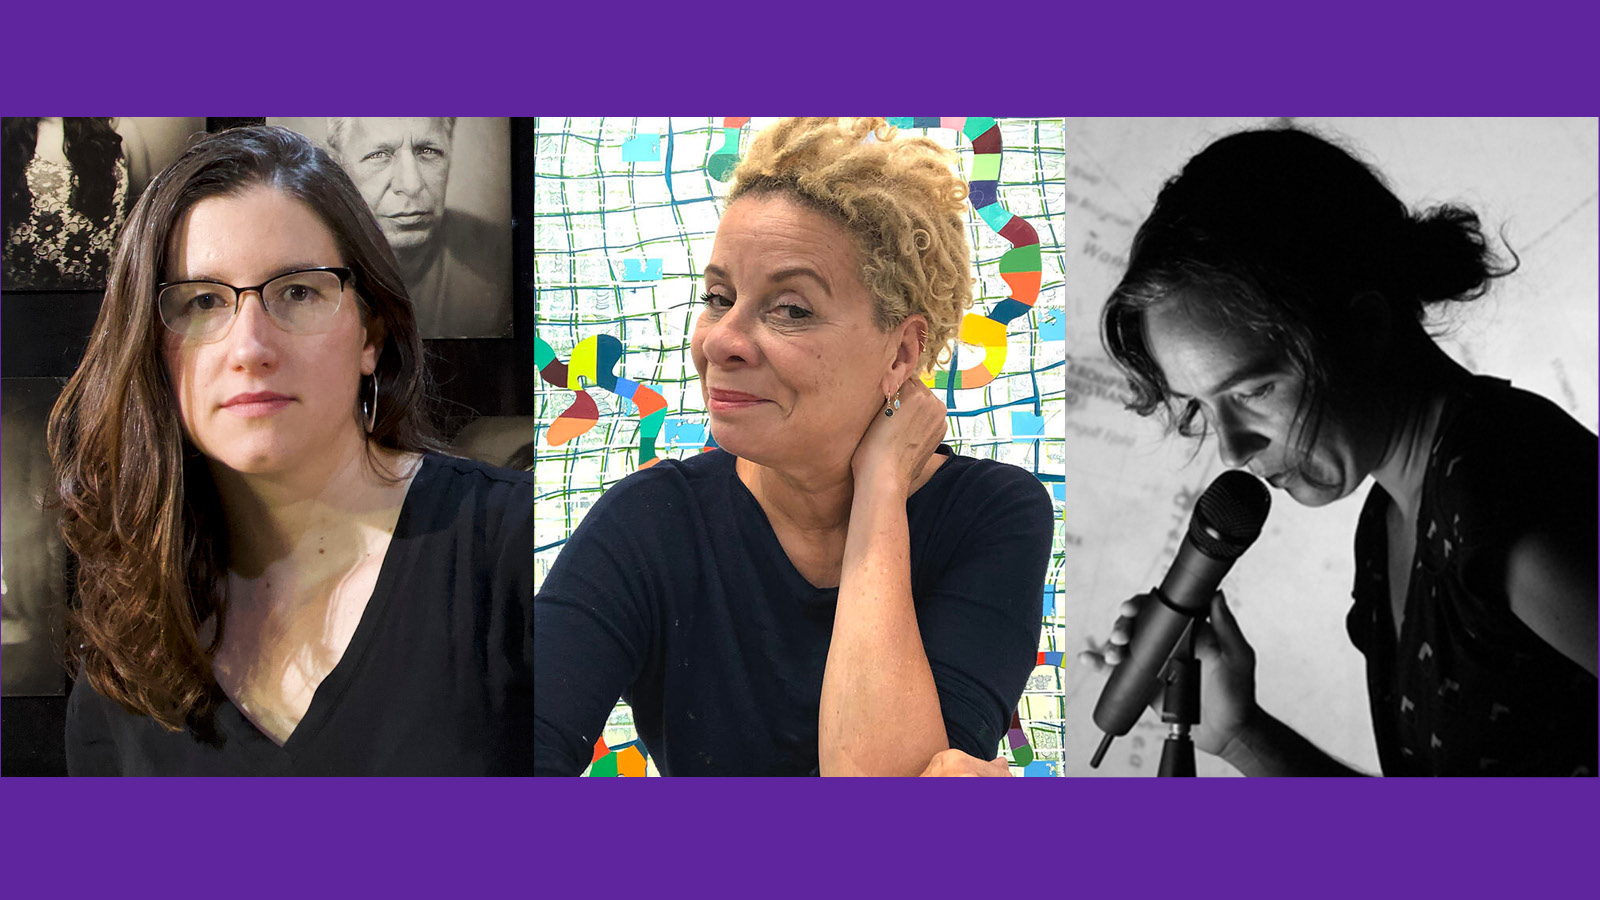 Professor Lisa Corinne Davis and alumni Ellie Ga and Keliy Anderson-Staley are among 180 scientists, writers, scholars, and artists honored.